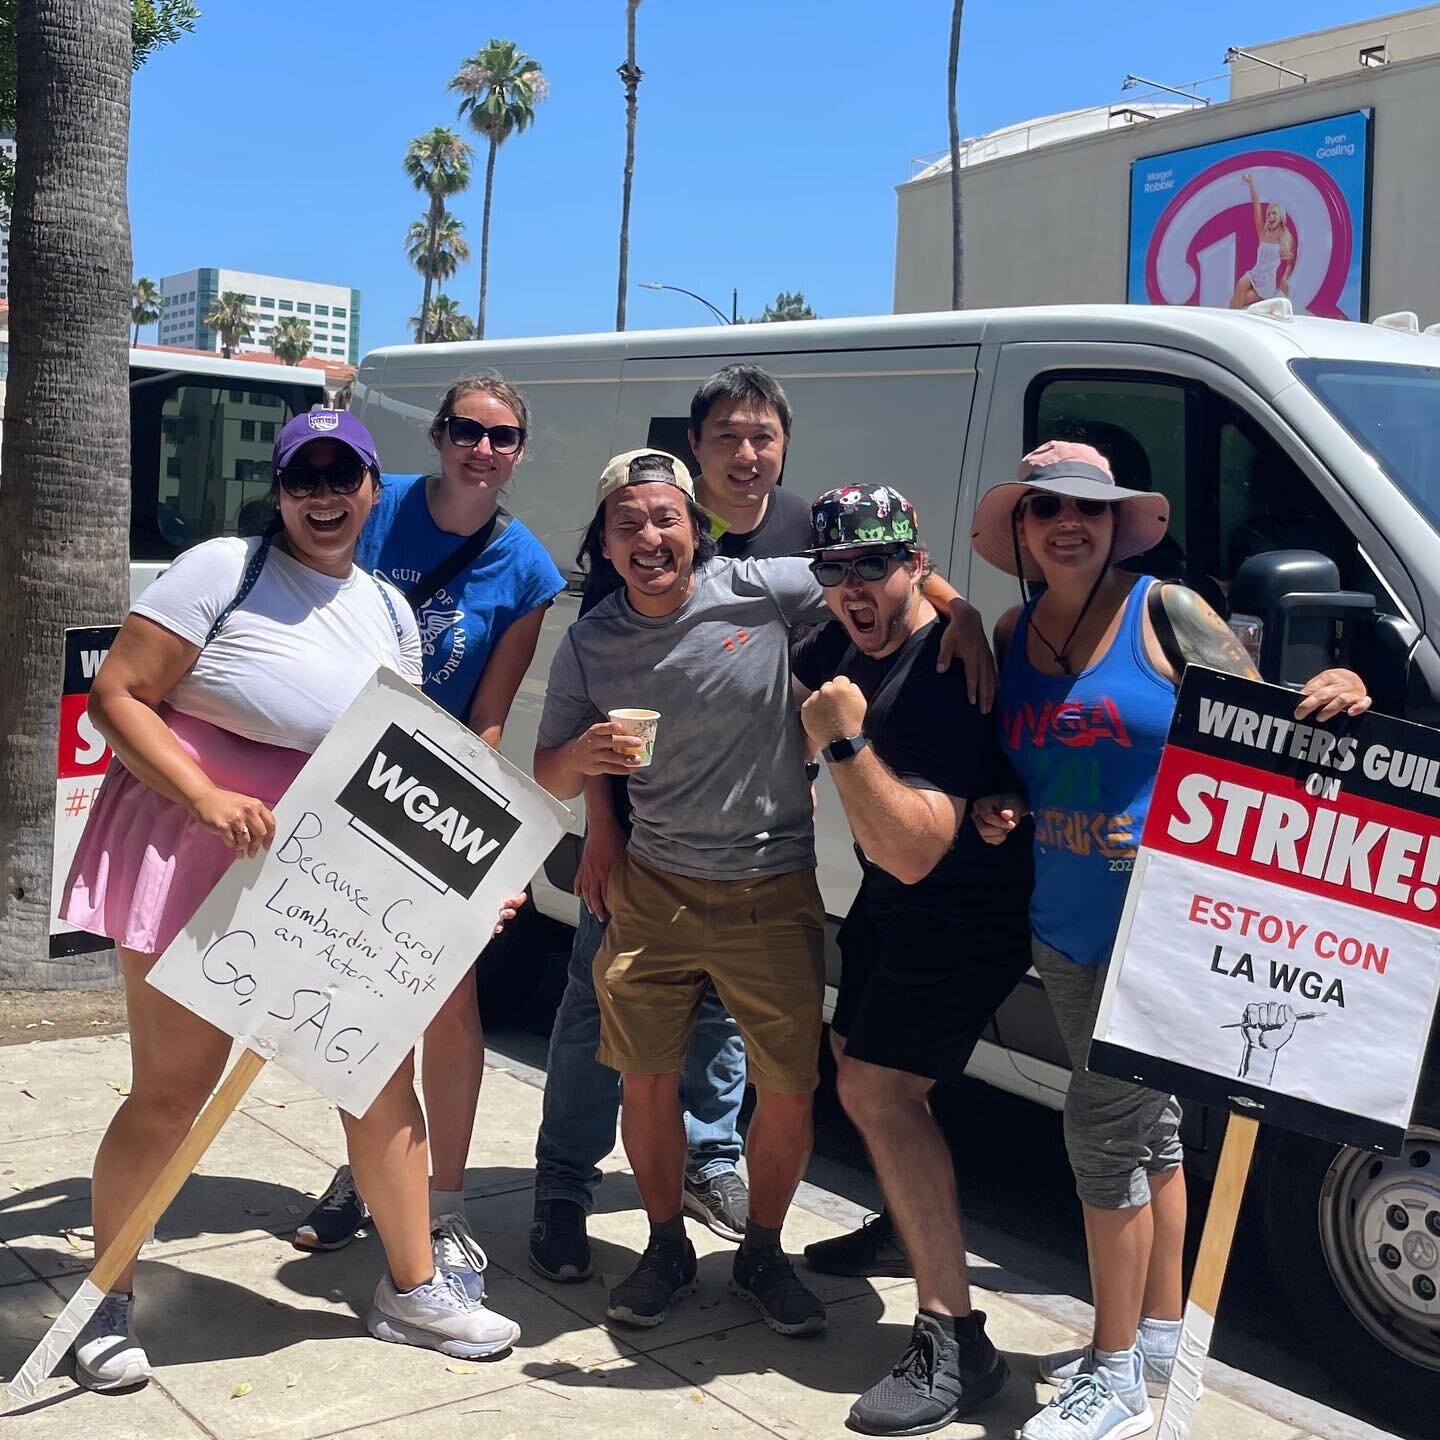 I&rsquo;ve been doing a bunch of solo picketing lately so it was super fun getting to picket with friends today at WB!

📸 @marisammarquez 

#wgastrong #wgastrike #sagaftrastrong #sagaftrastrike